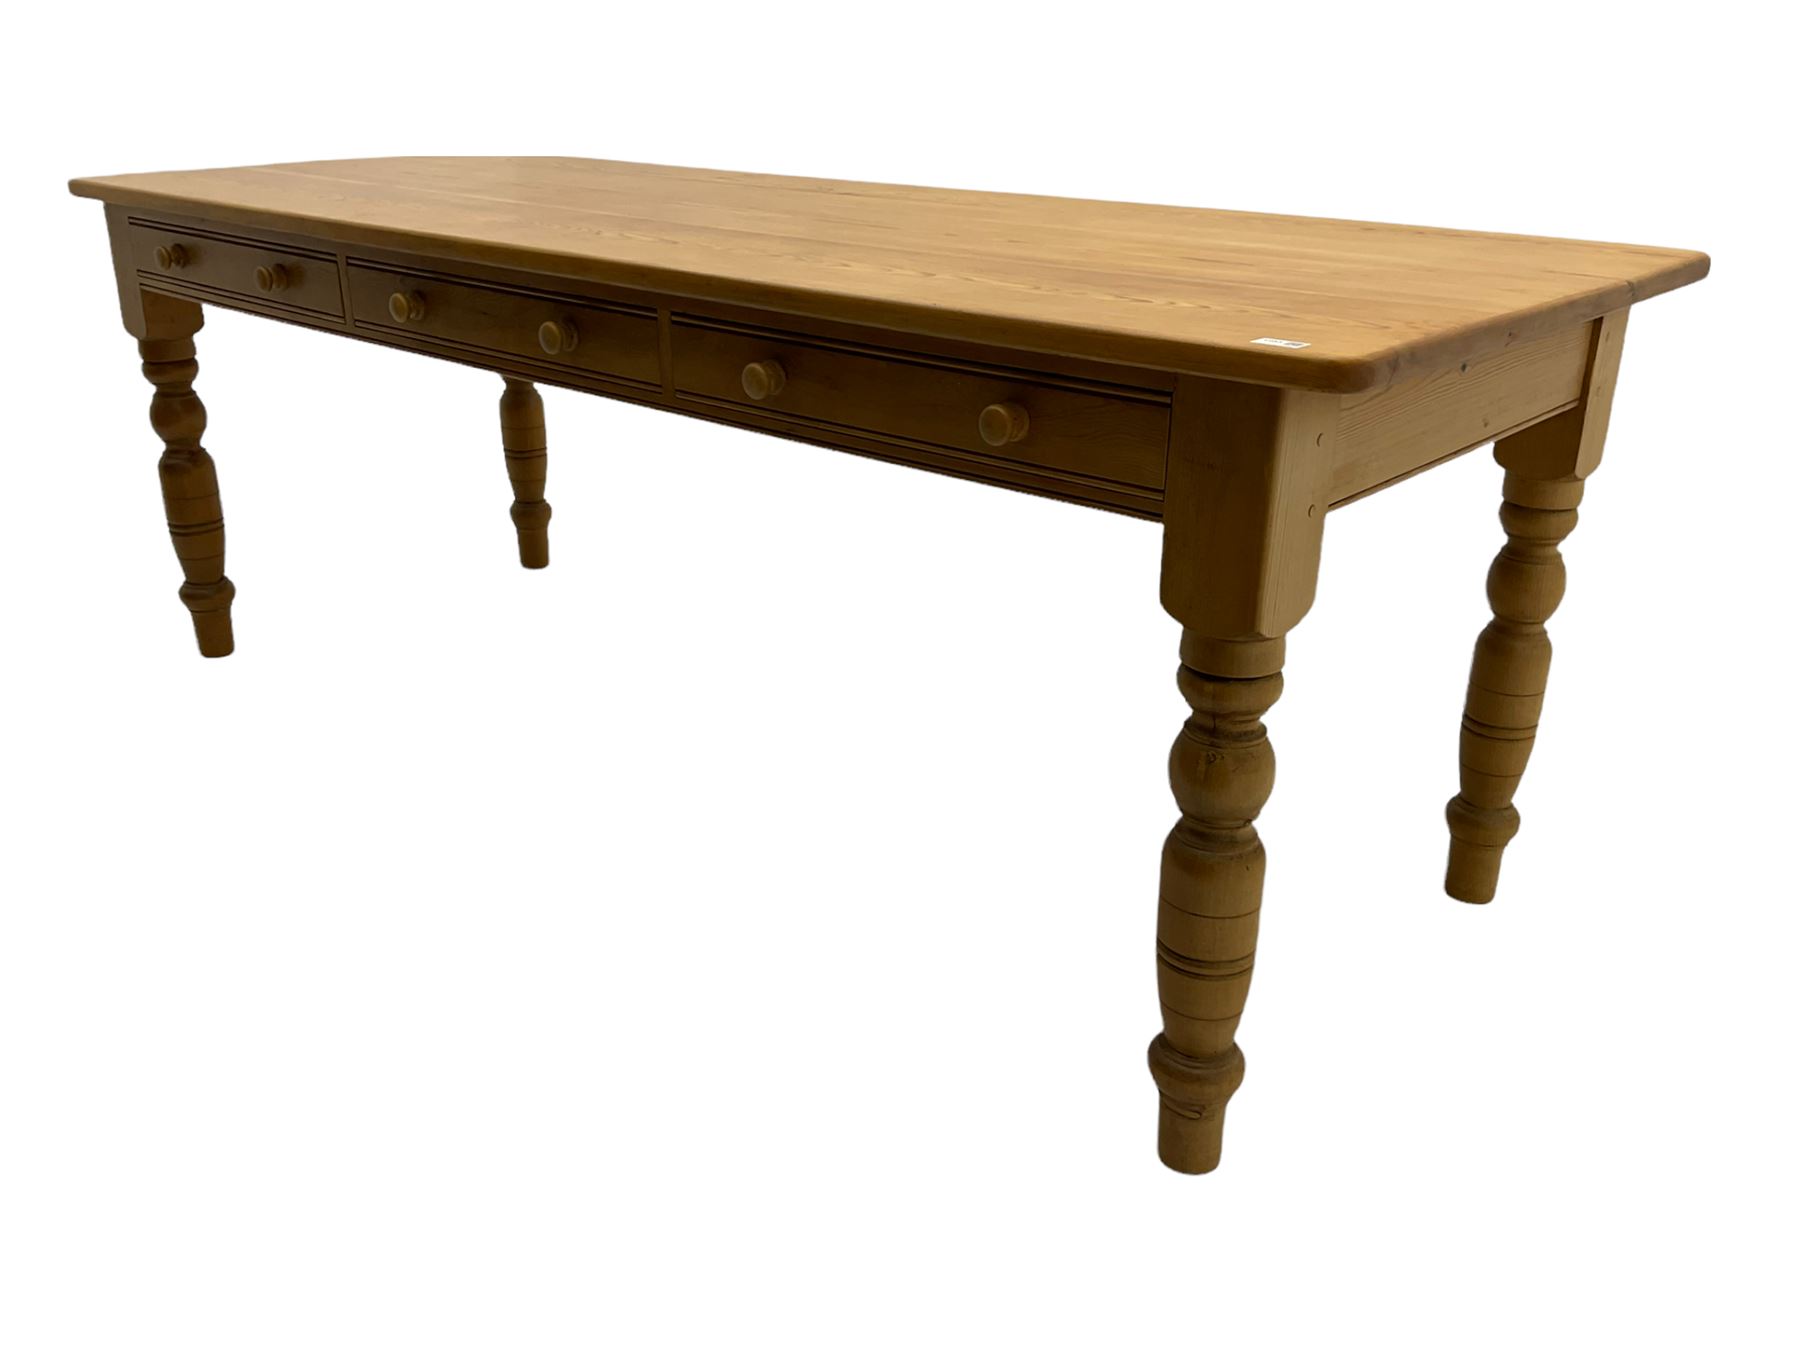 Farmhouse pine dining table - Image 4 of 4